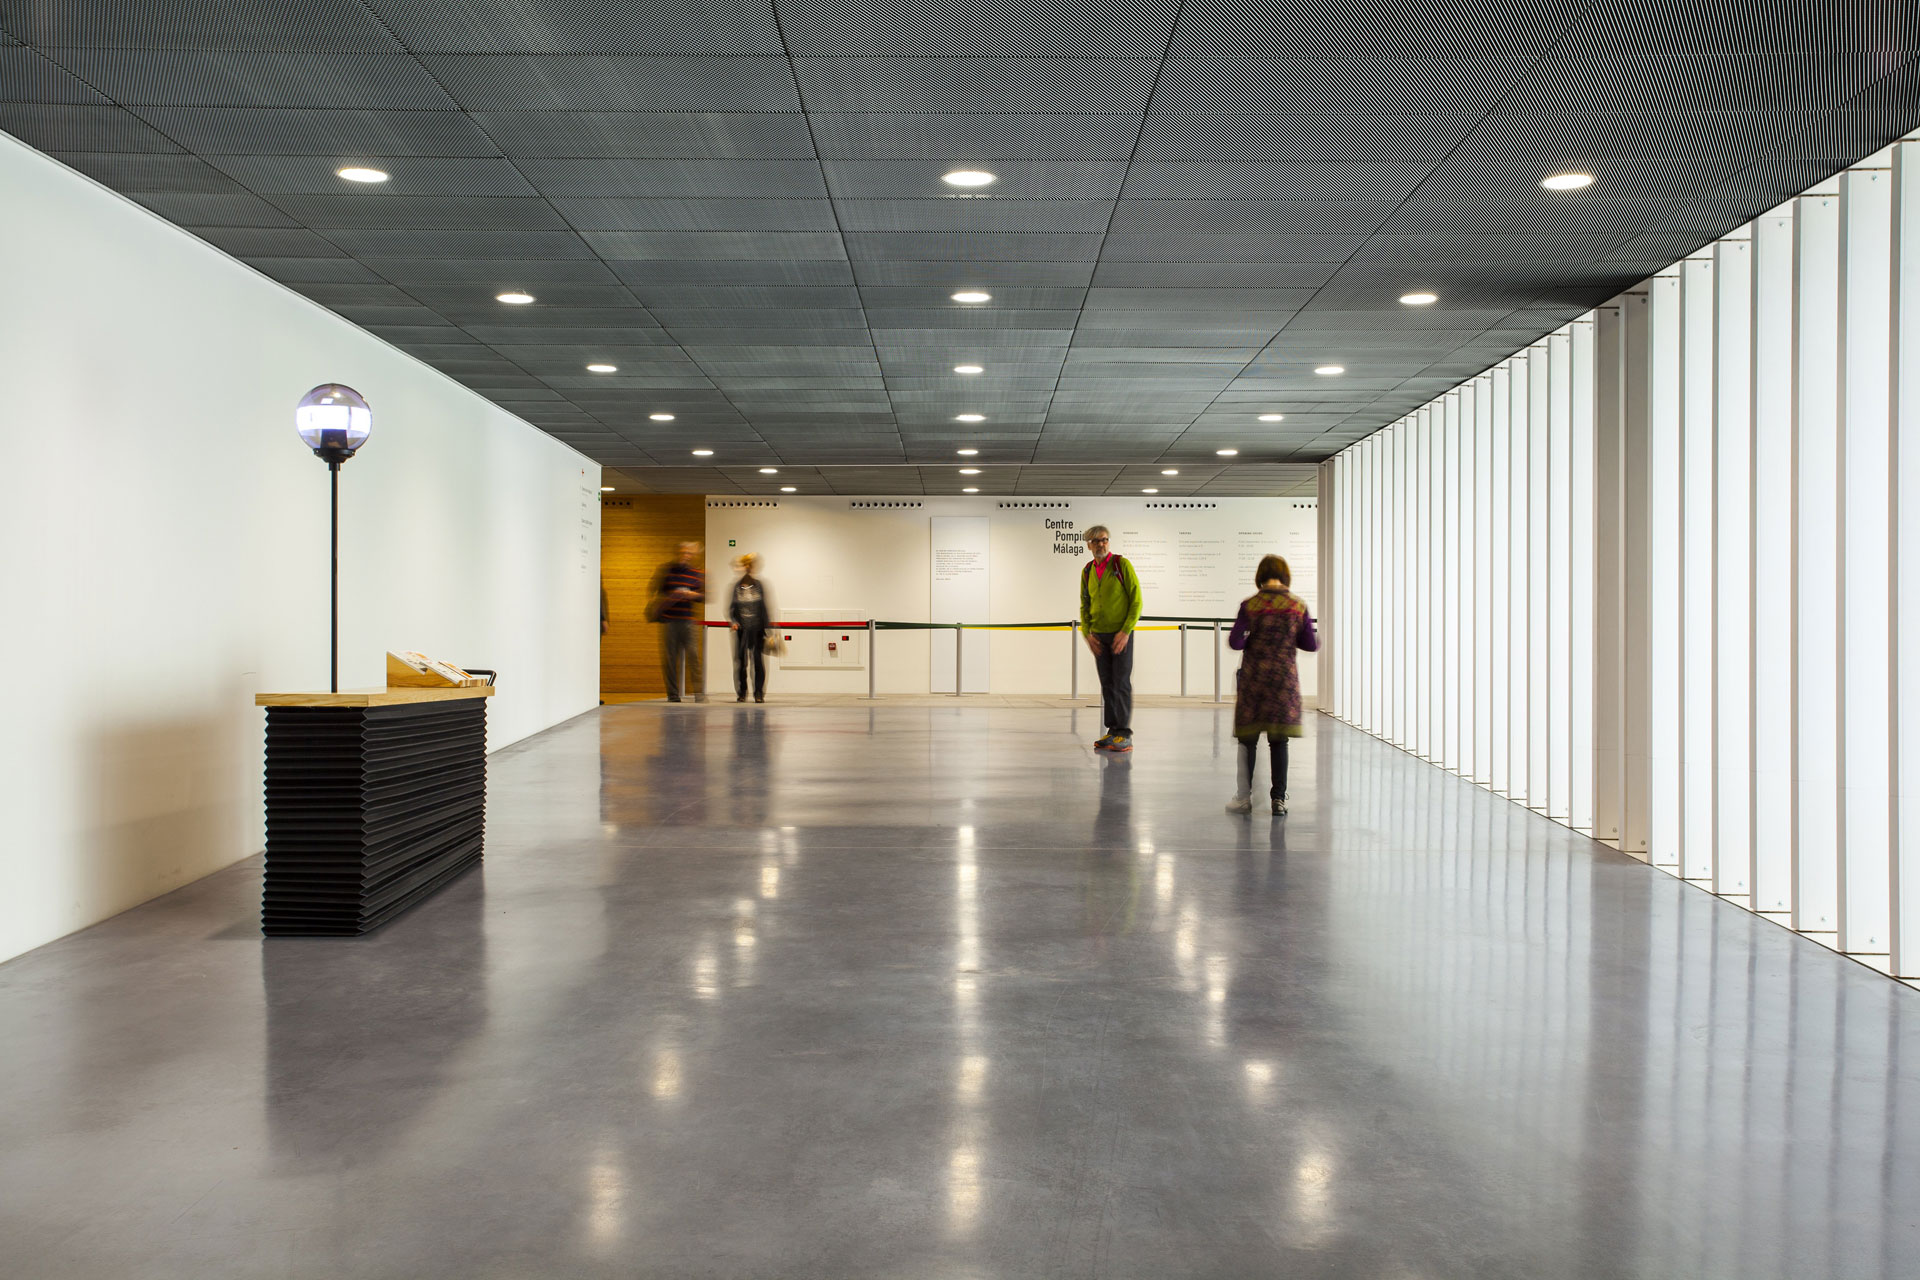 View into a wide building corridor with a reflective concrete floor and symmetrically arranged lamps in the ceiling. Four people are standing in the corridor, on the left there is a counter with a light.